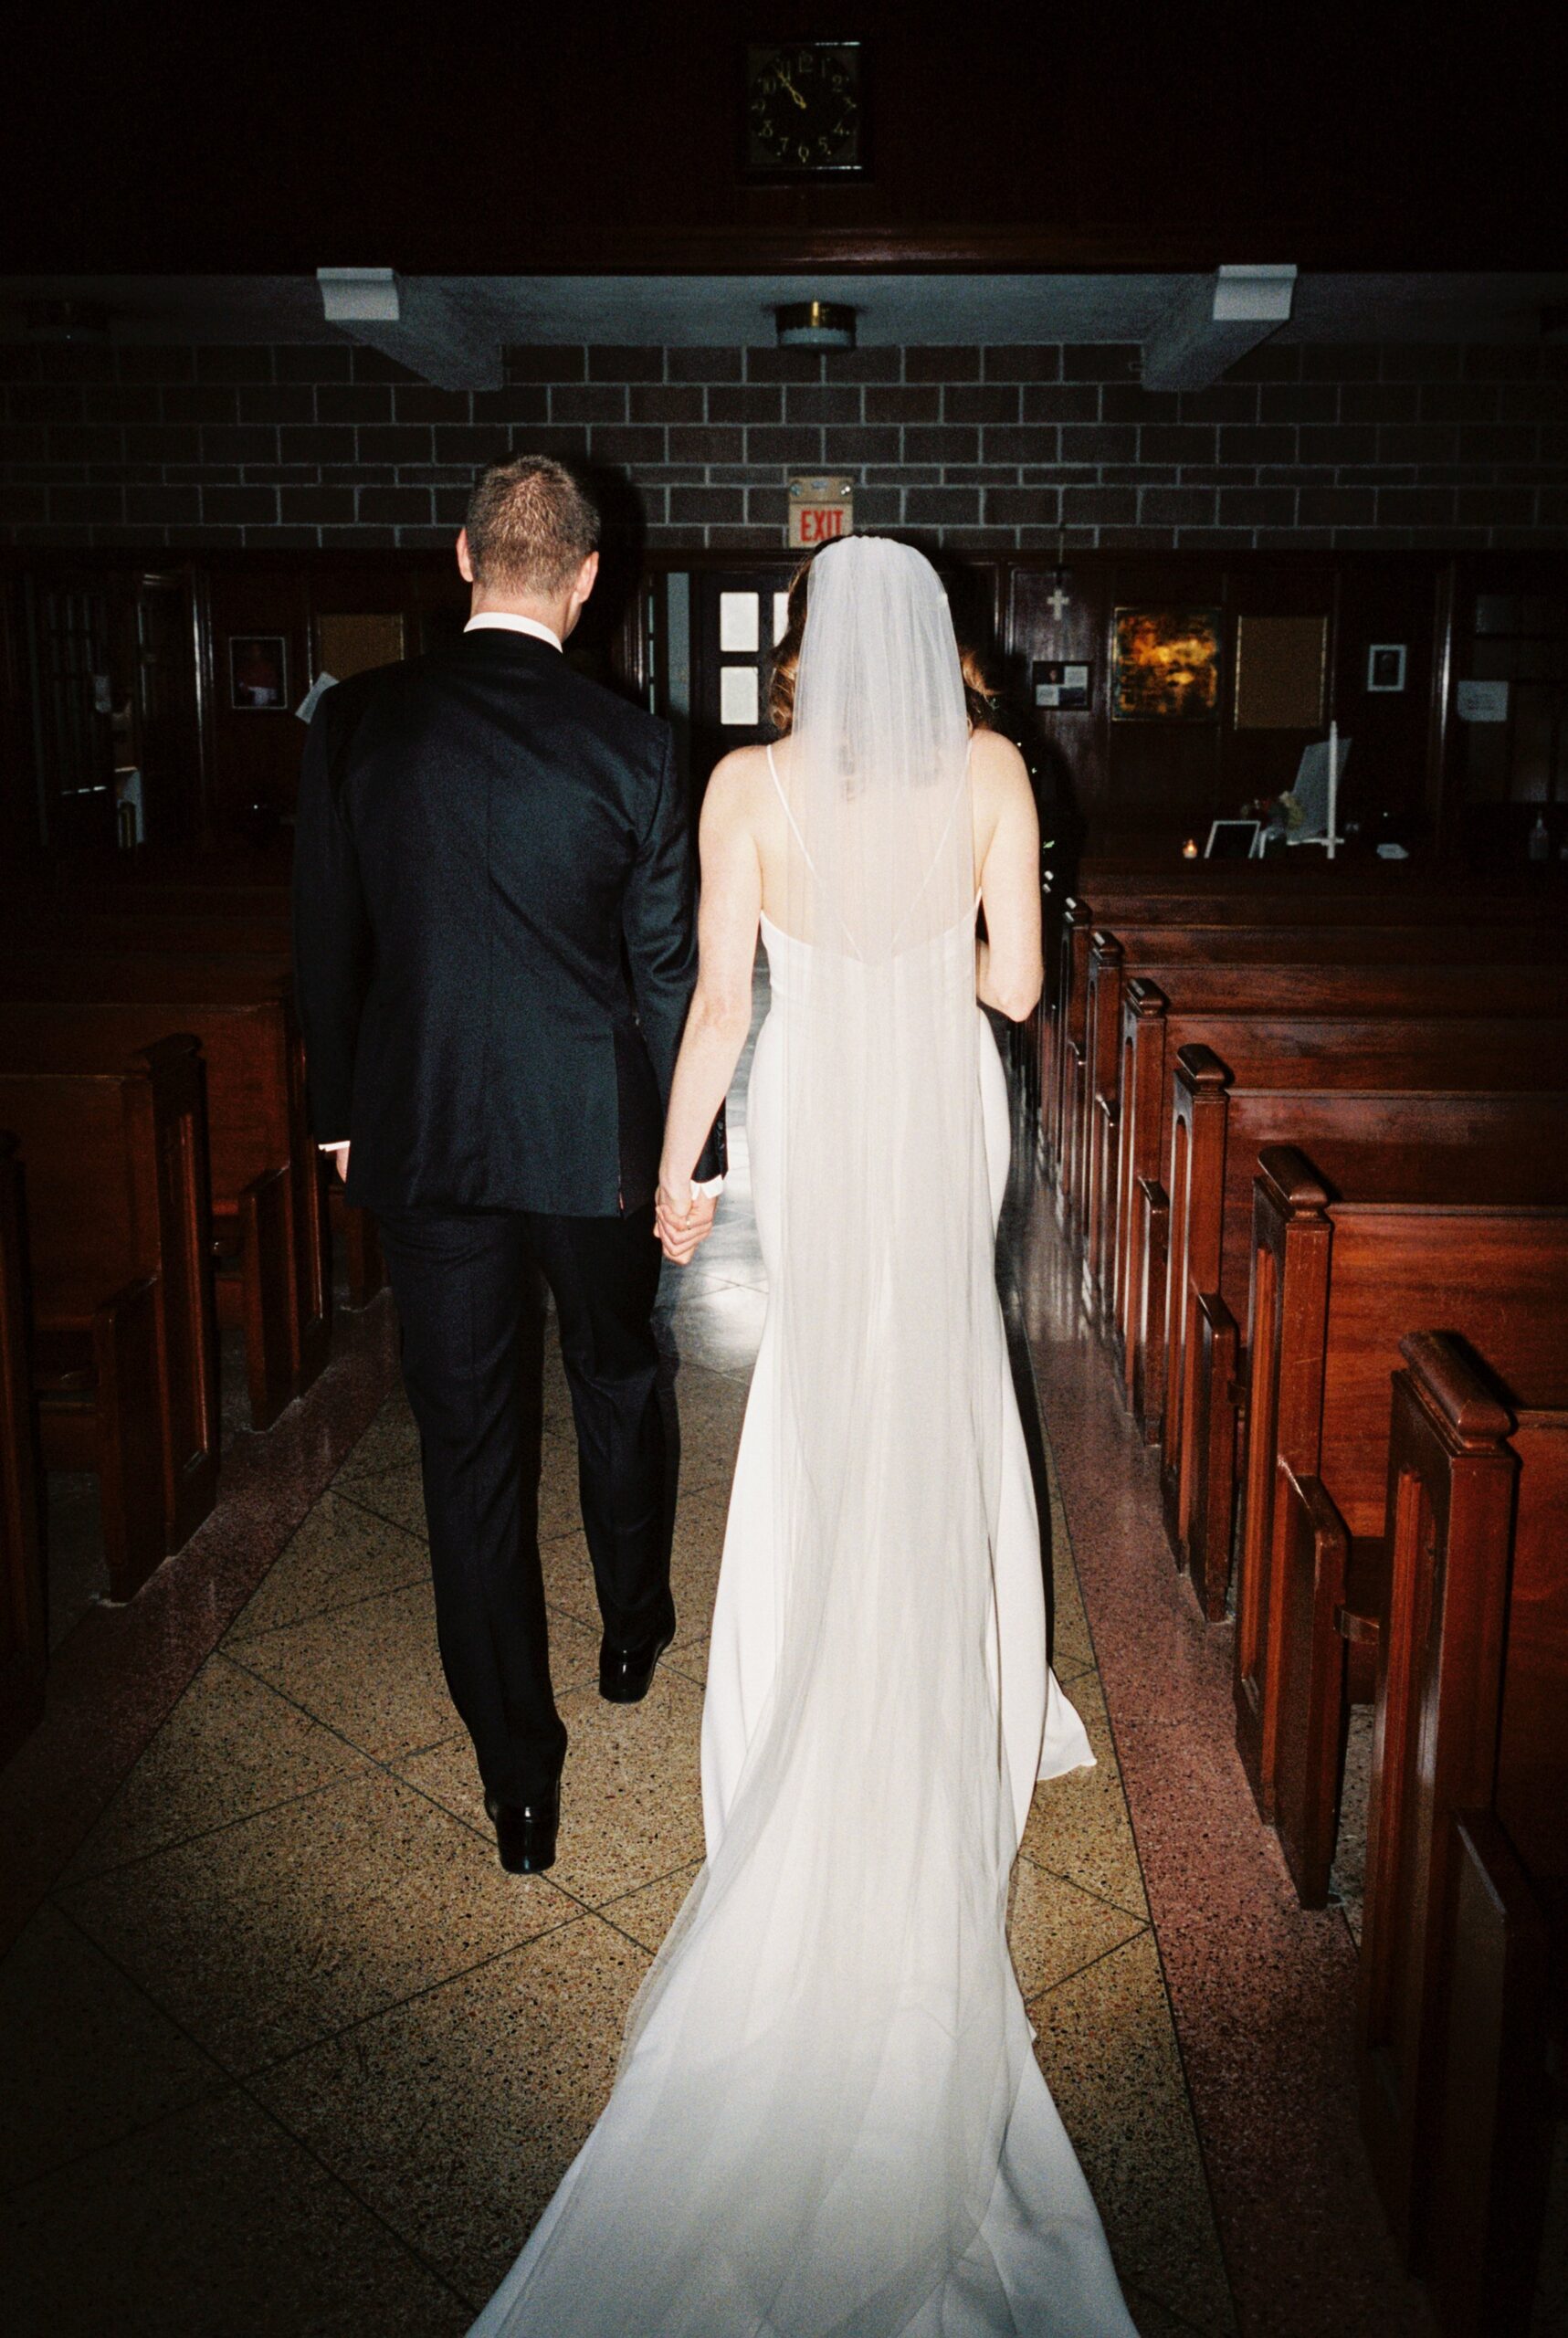 Flash photography film photo of bride and groom leaving church